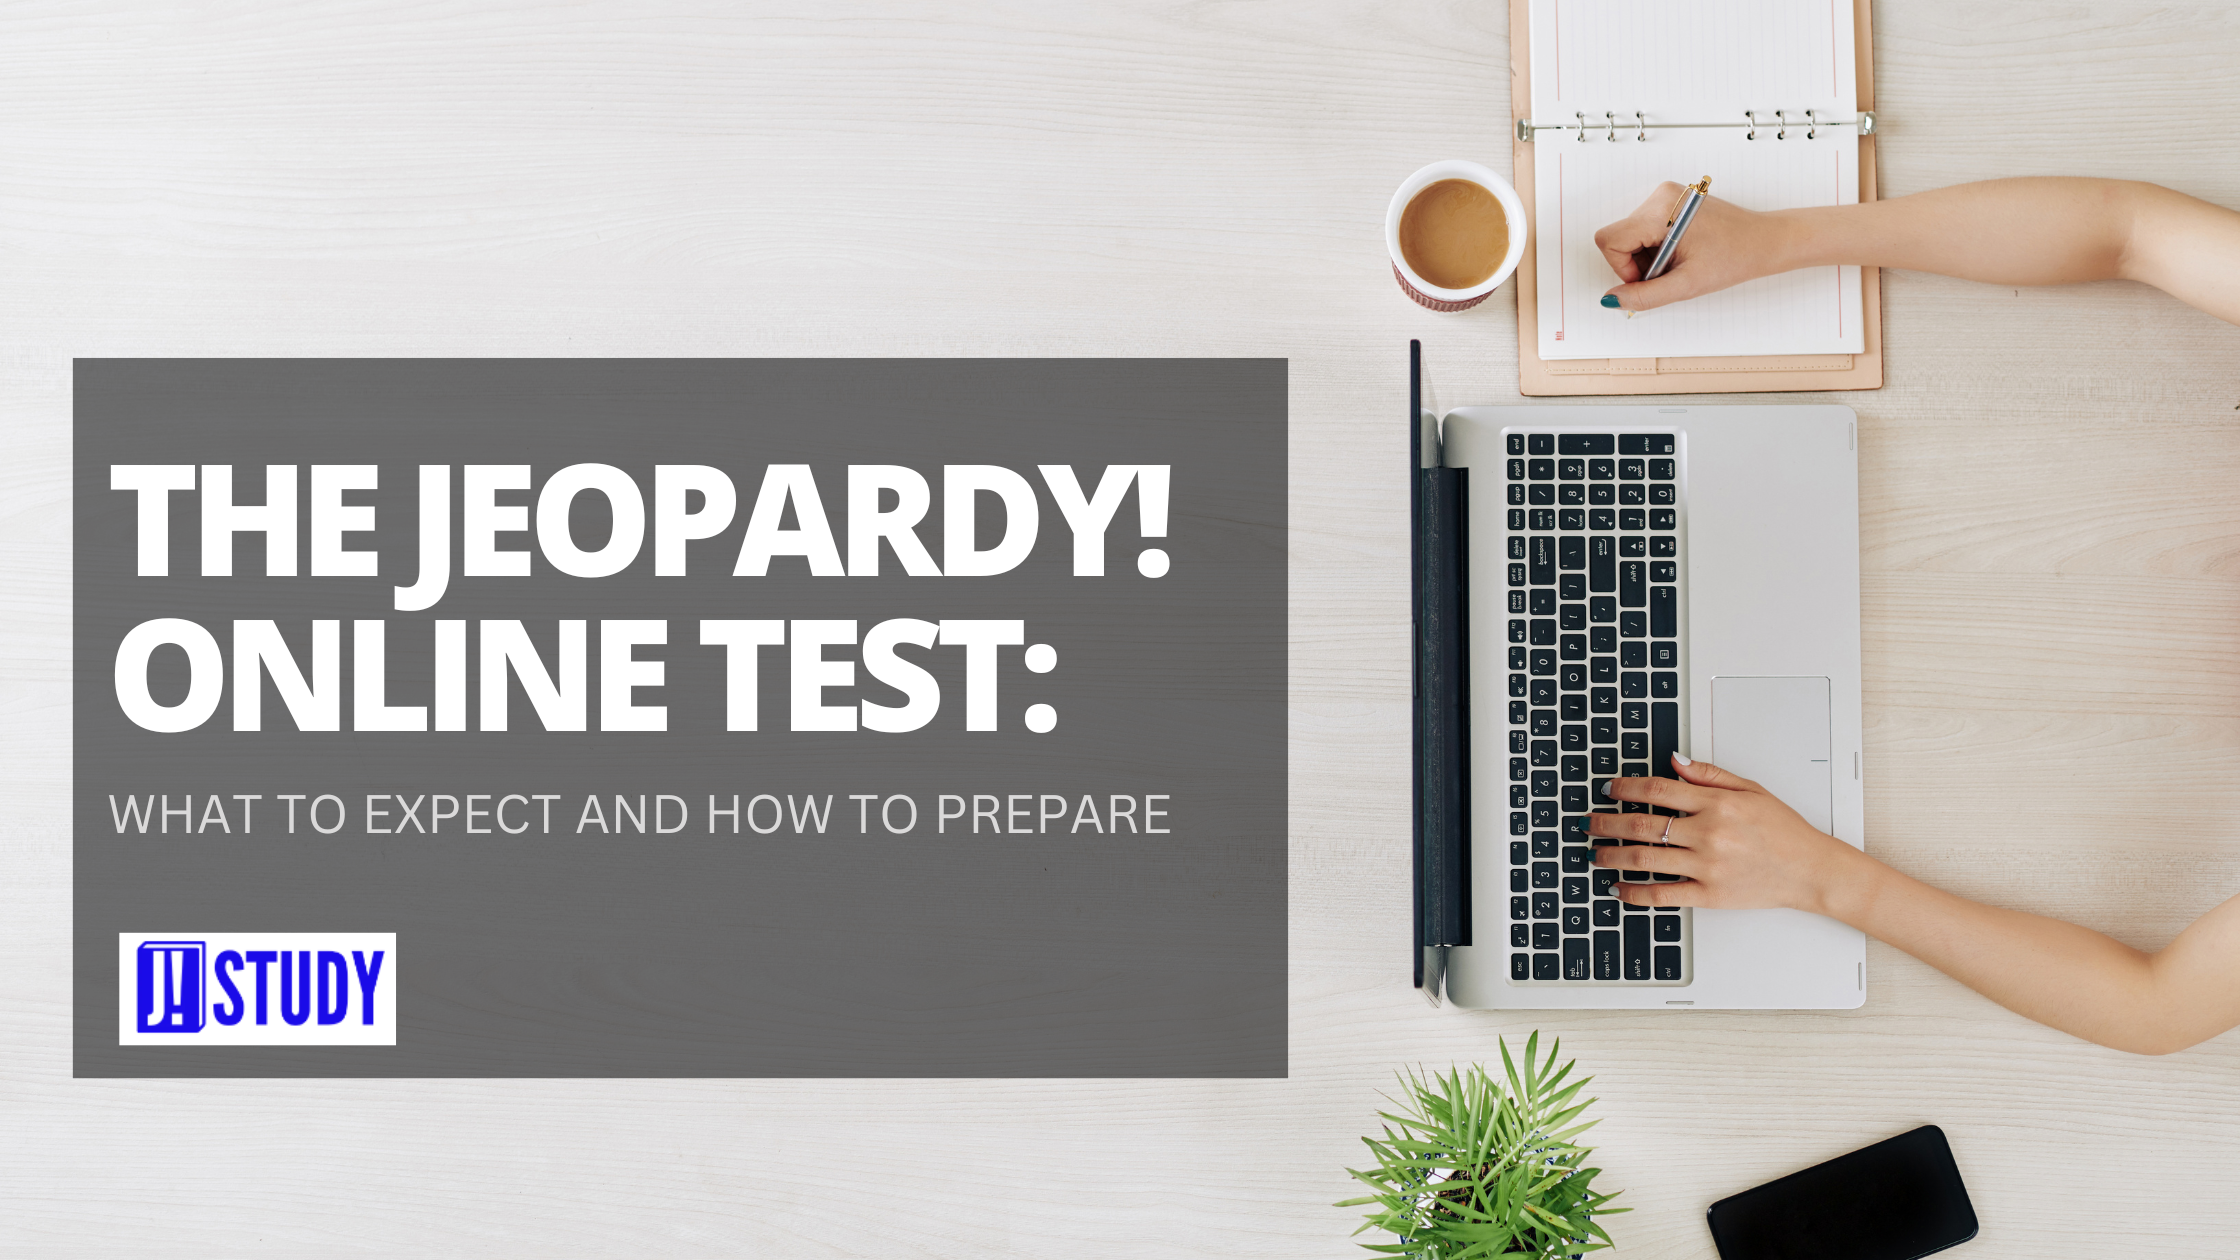 The Jeopardy! Online Test: What to Expect and How to Prepare